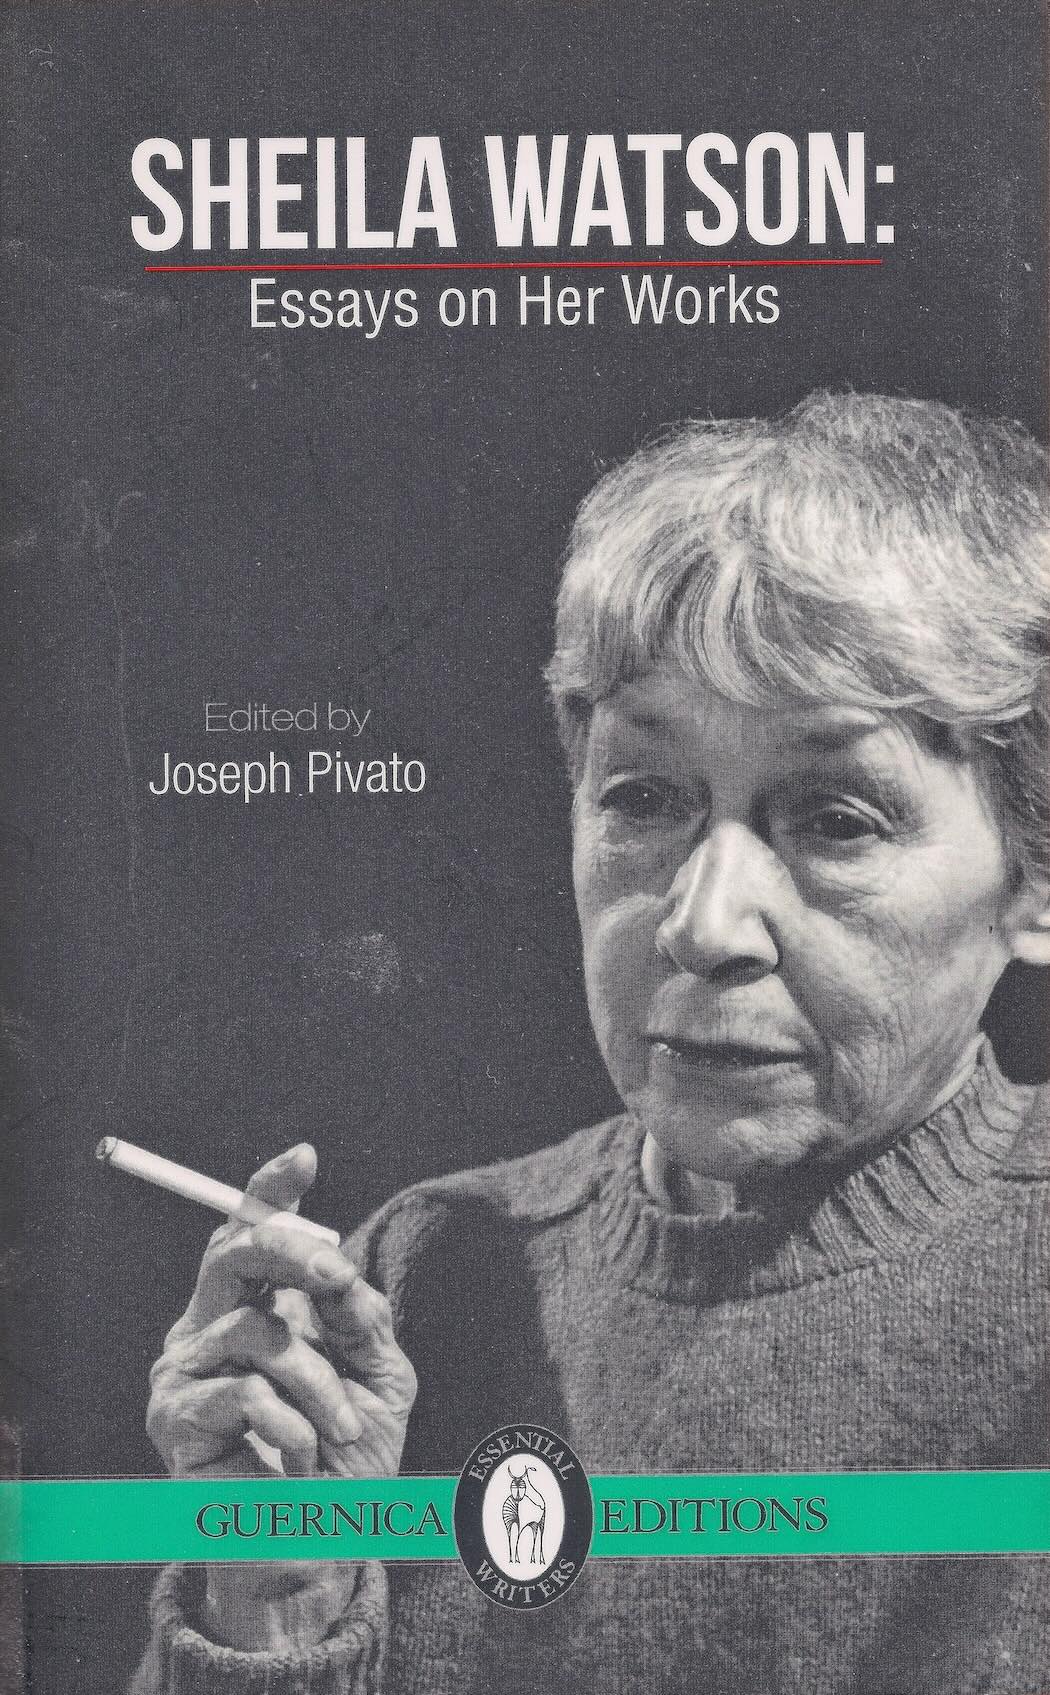 Cover Image of Sheila Watson: Essays on Her Works